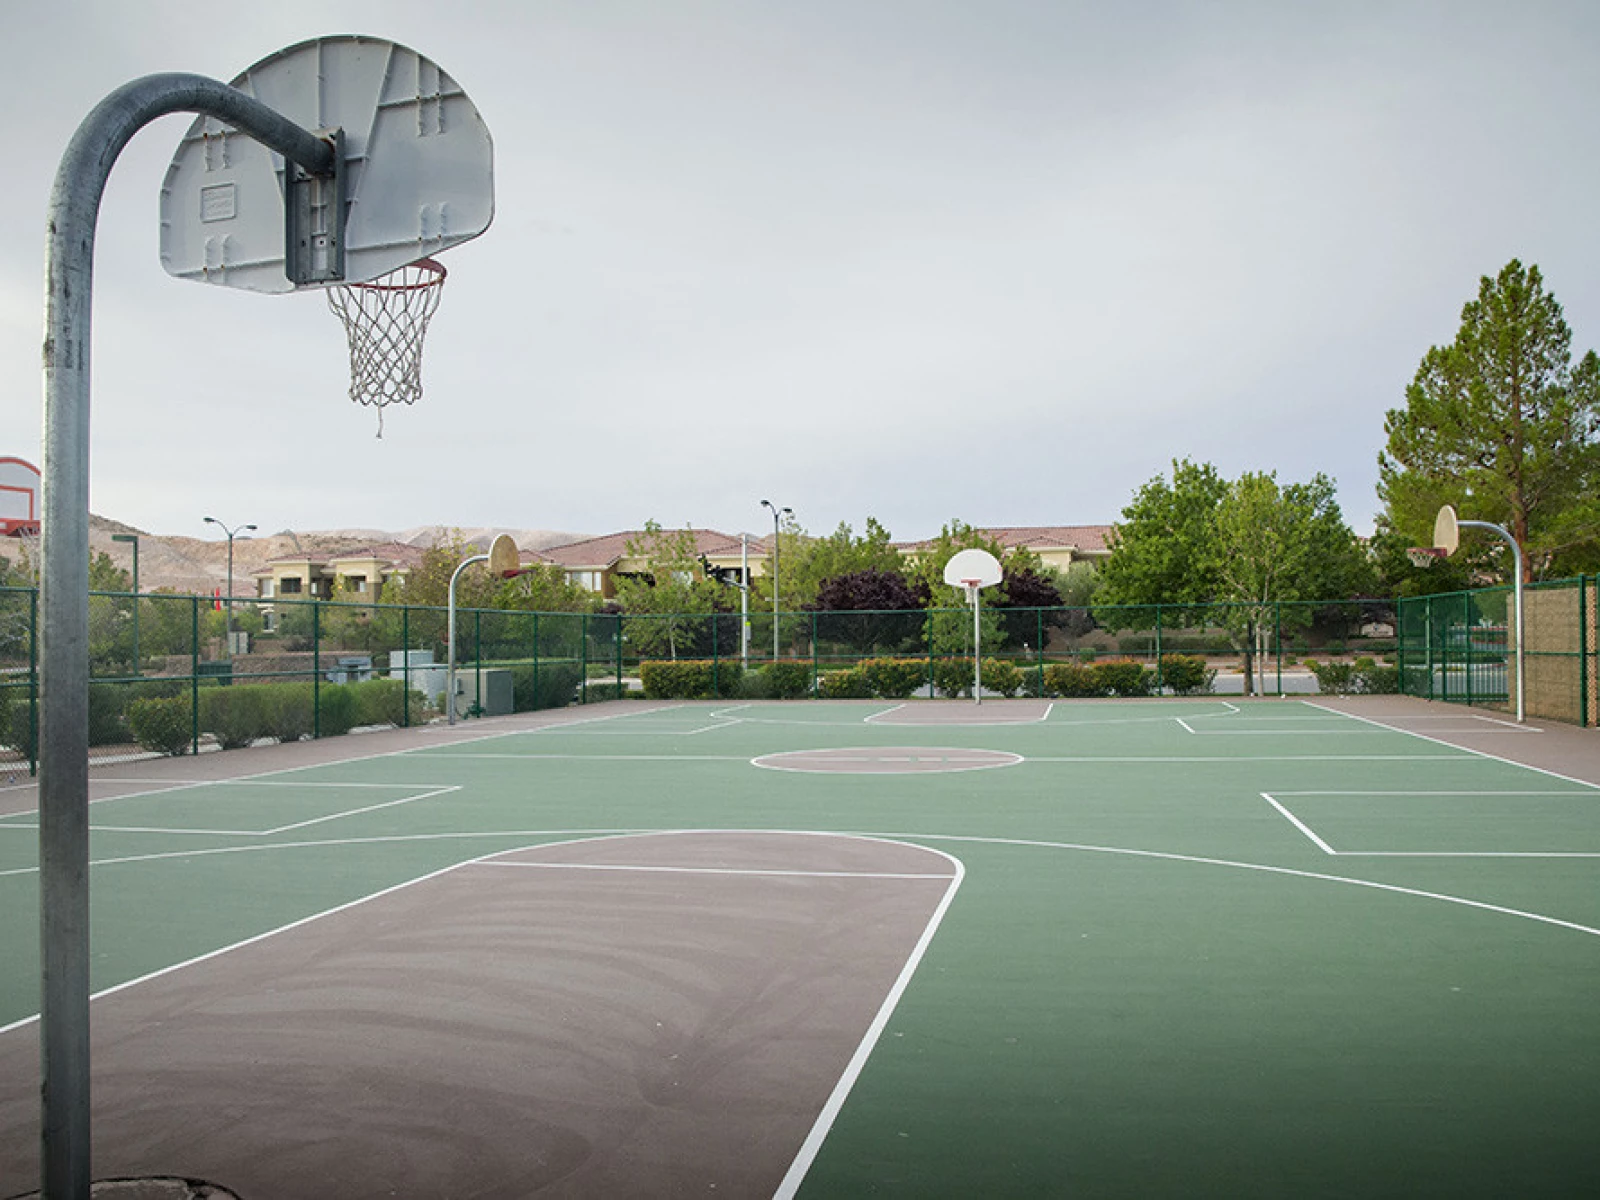 Henderson NV Basketball Court: Arroyo Grande Courts of the World